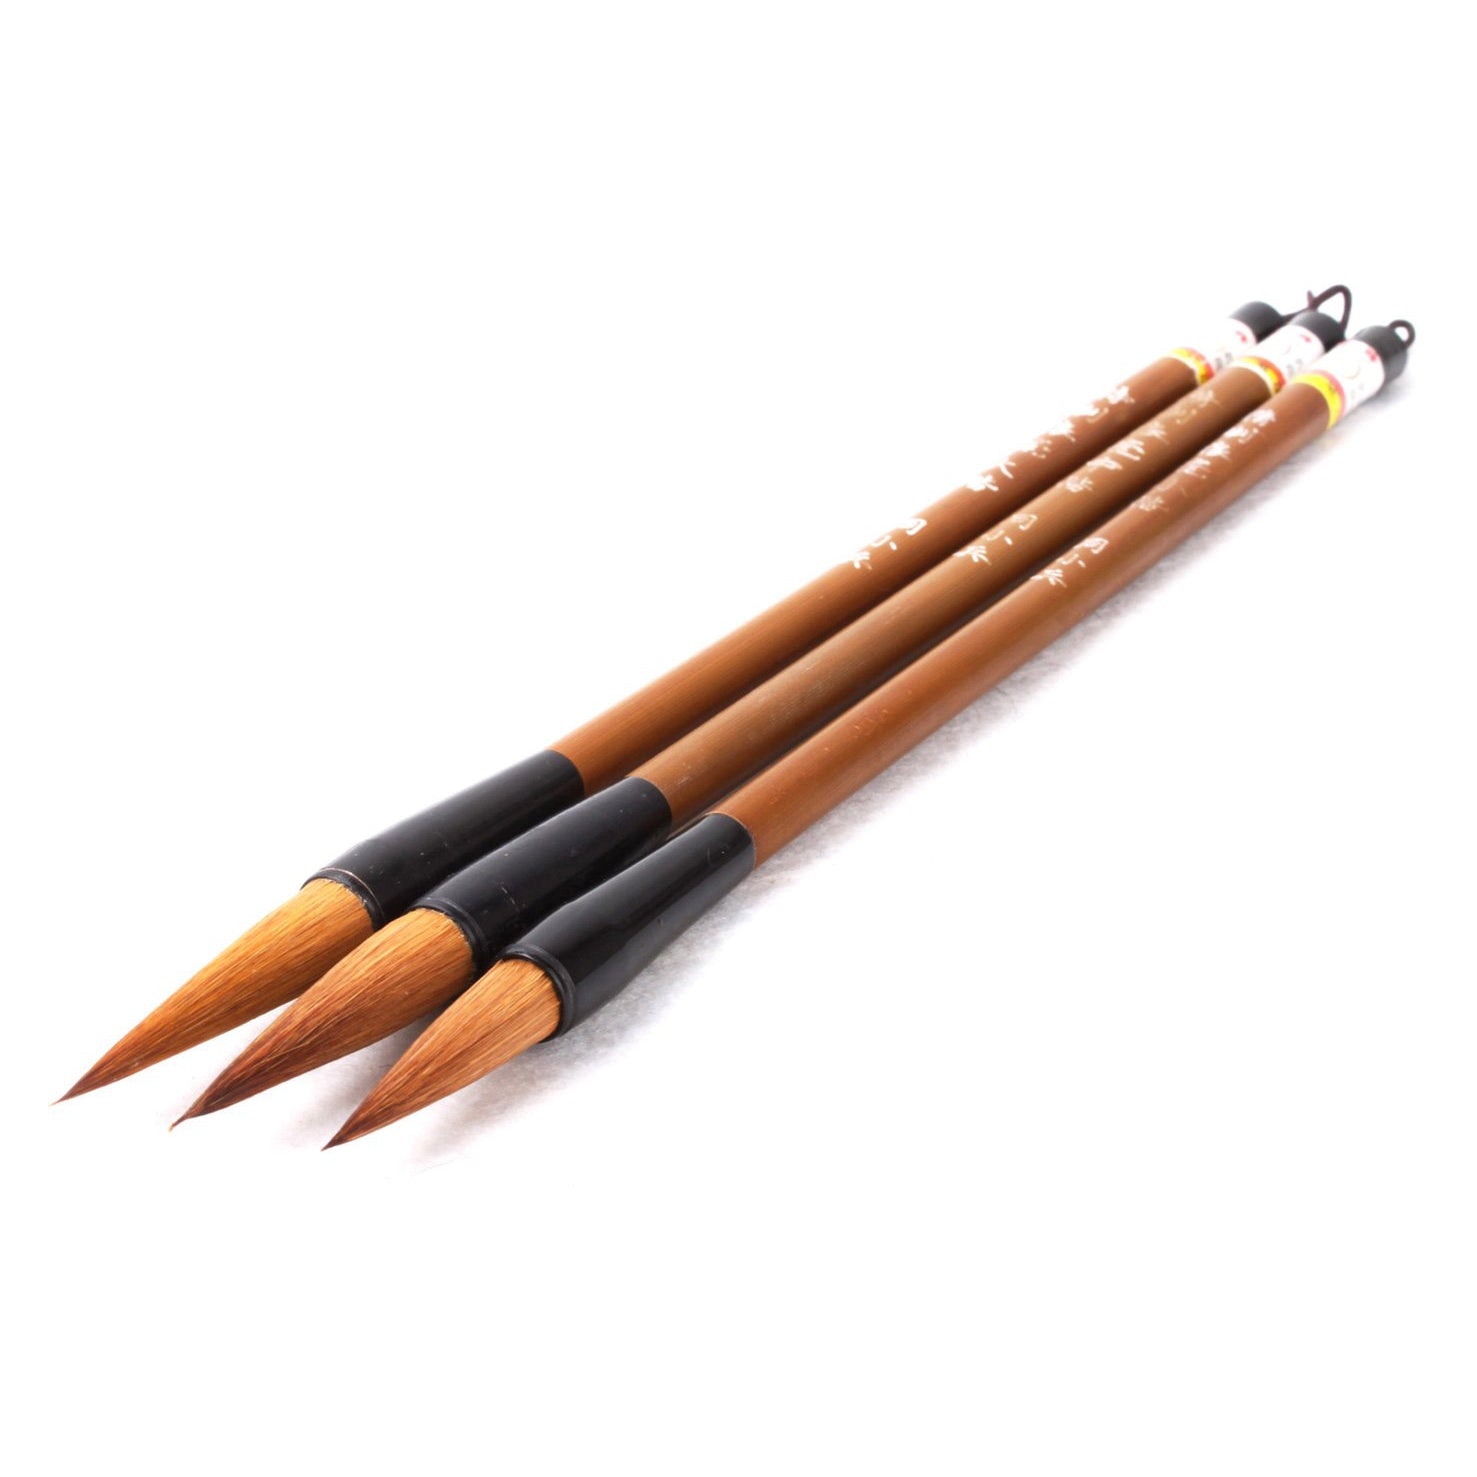 Artecho Chinese Calligraphy Brushes Gift Calligraphy Sumi Brush Chinese  Brushes Set 10 Pcs for Beginners